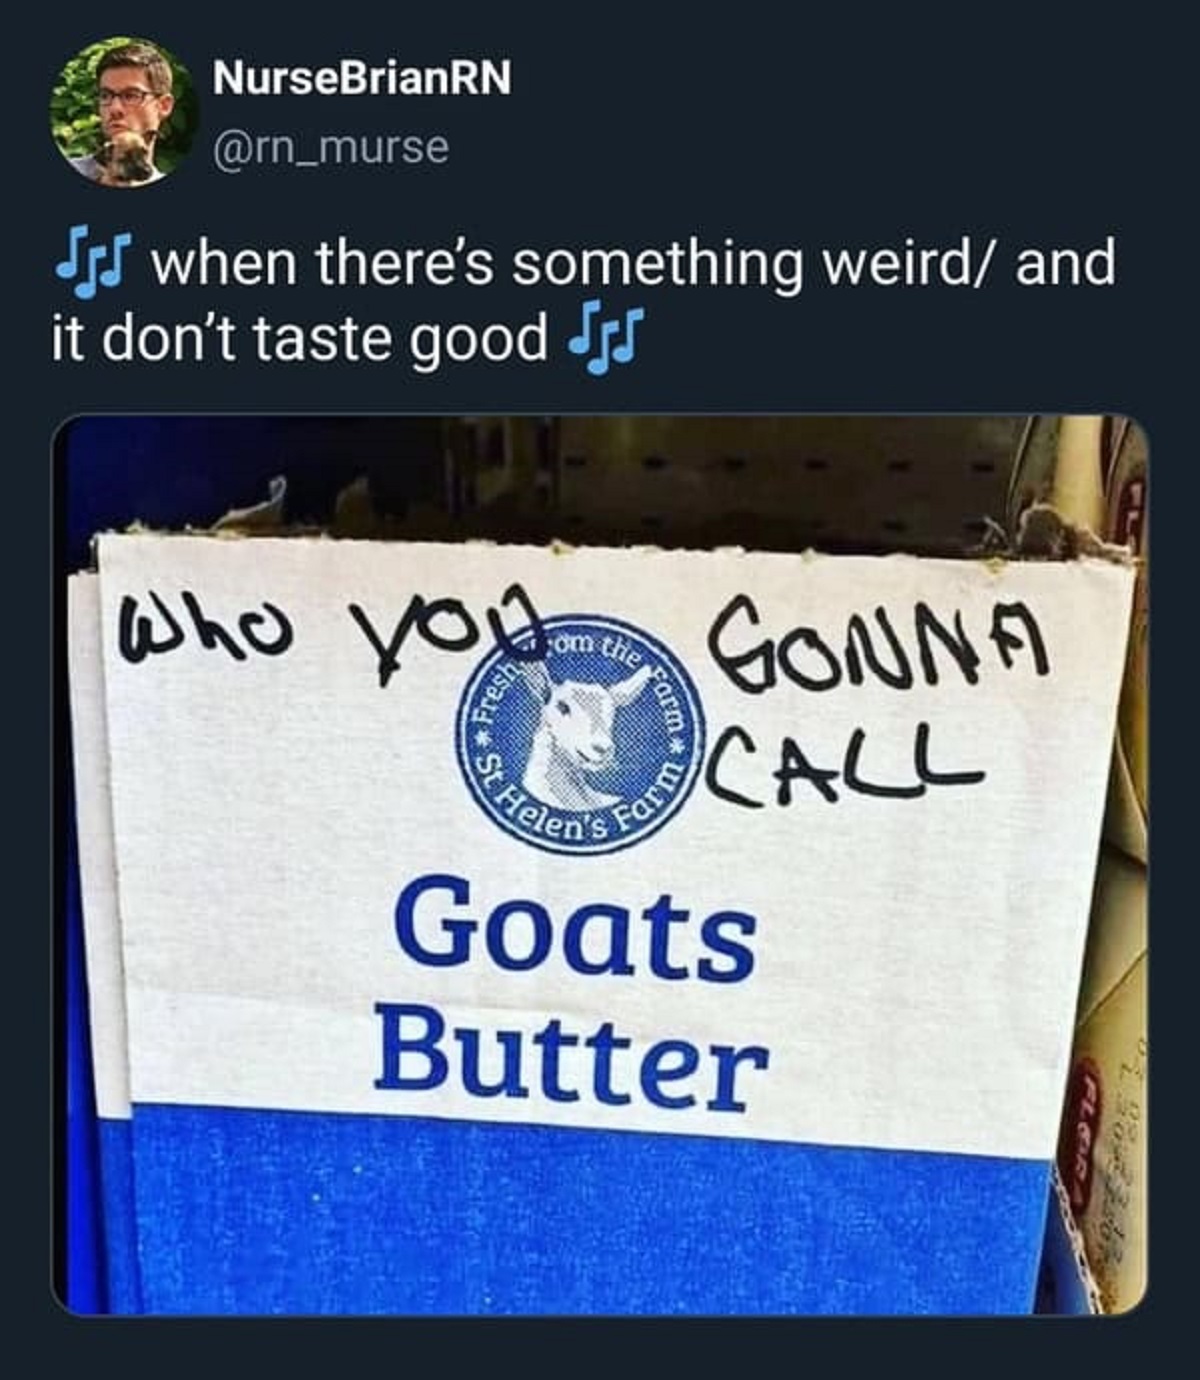 screenshot - NurseBrianRN J when there's something weird and it don't taste good Who you om the Fresh St Helen's Farm Farm Gonna Call Goats Butter